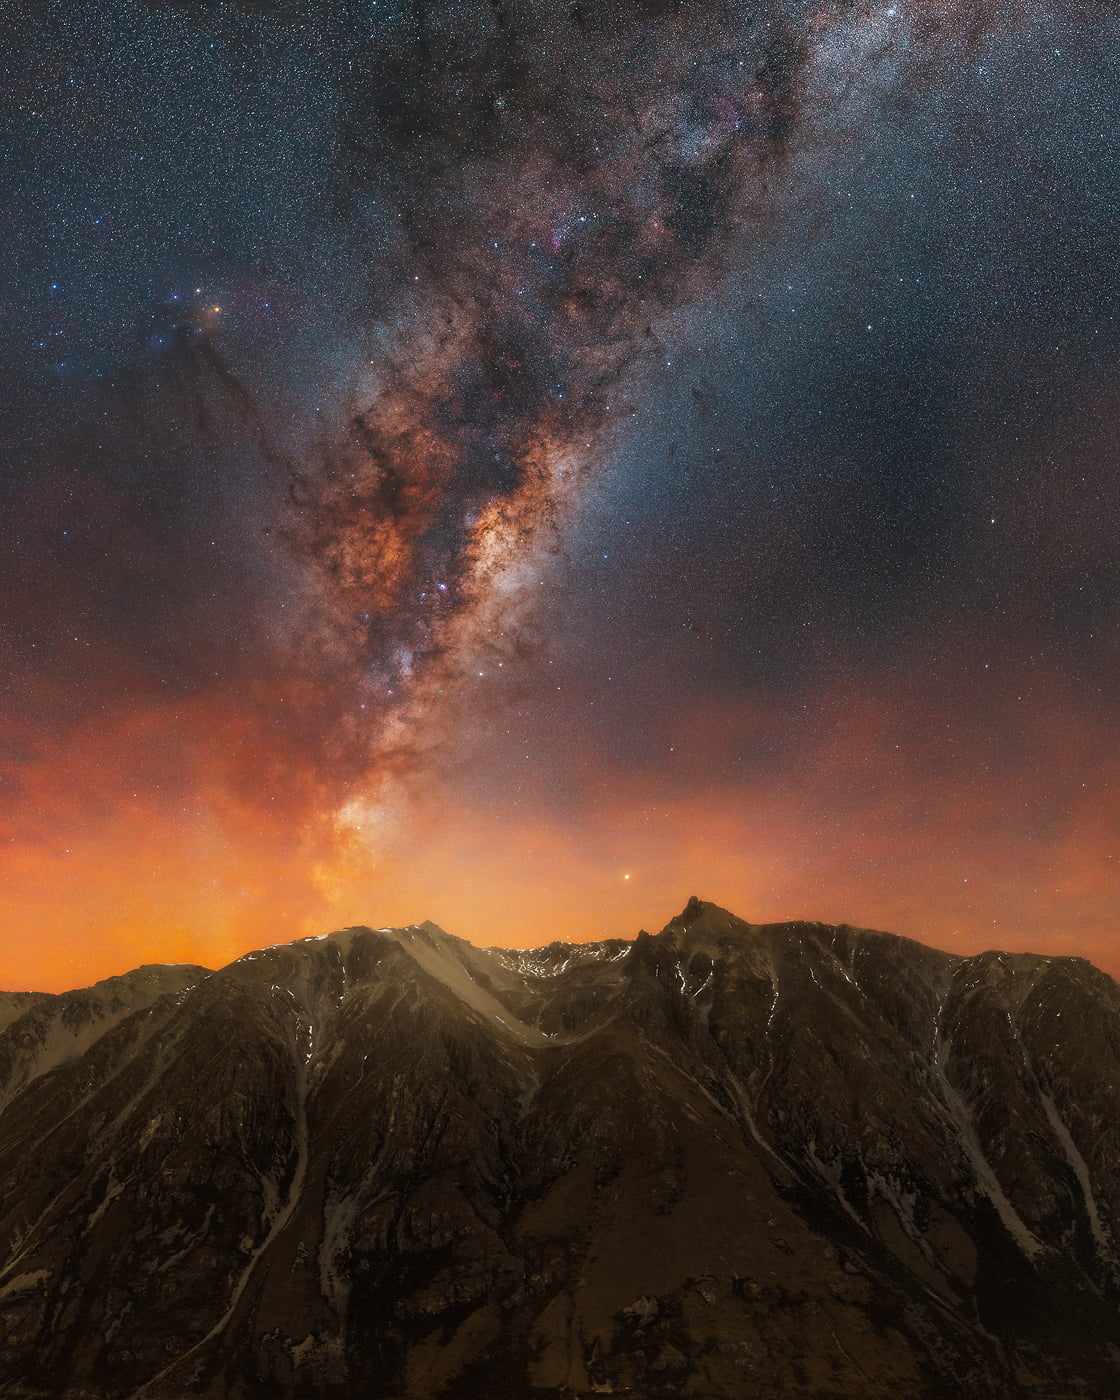 511 megapixels! A very high resolution, large-format VAST photo print of the Milky Way with stars above a beautiful mountain landscape; fine art astrophotography landscape photograph created by Paul Wilson in New Zealand.